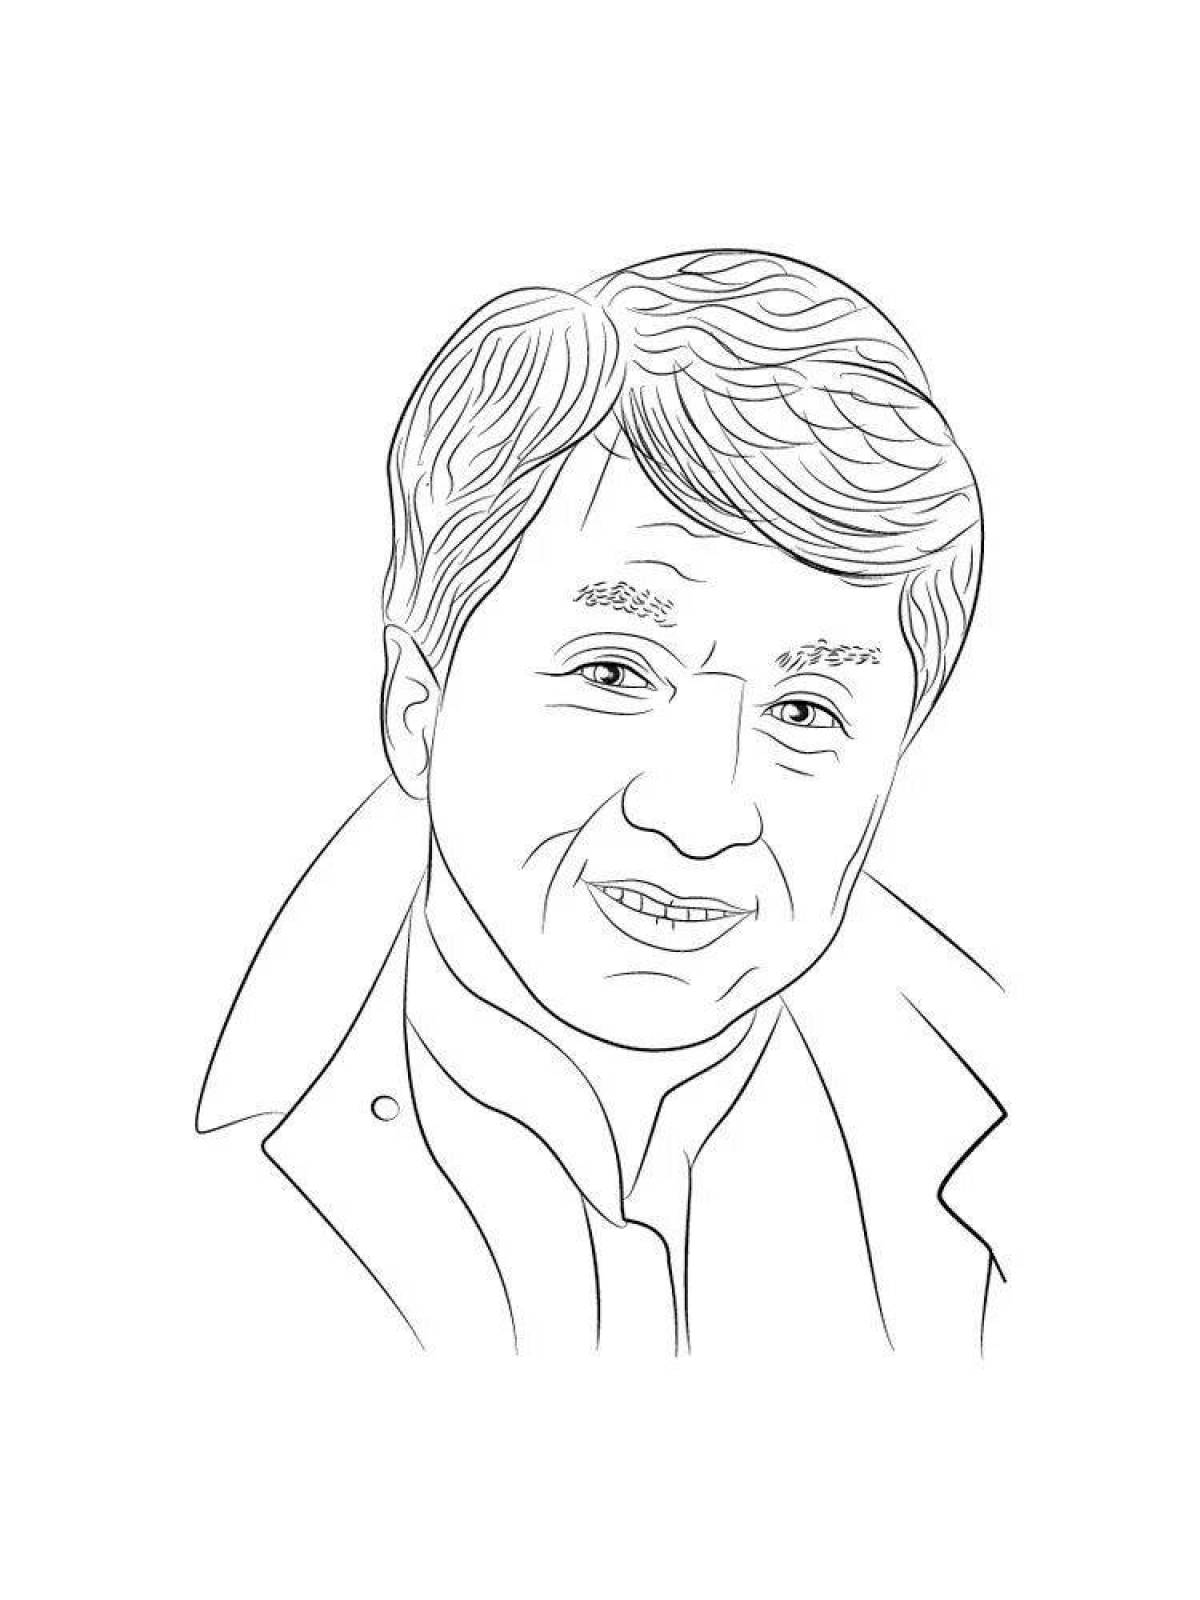 Gorgeous jackie chan coloring book